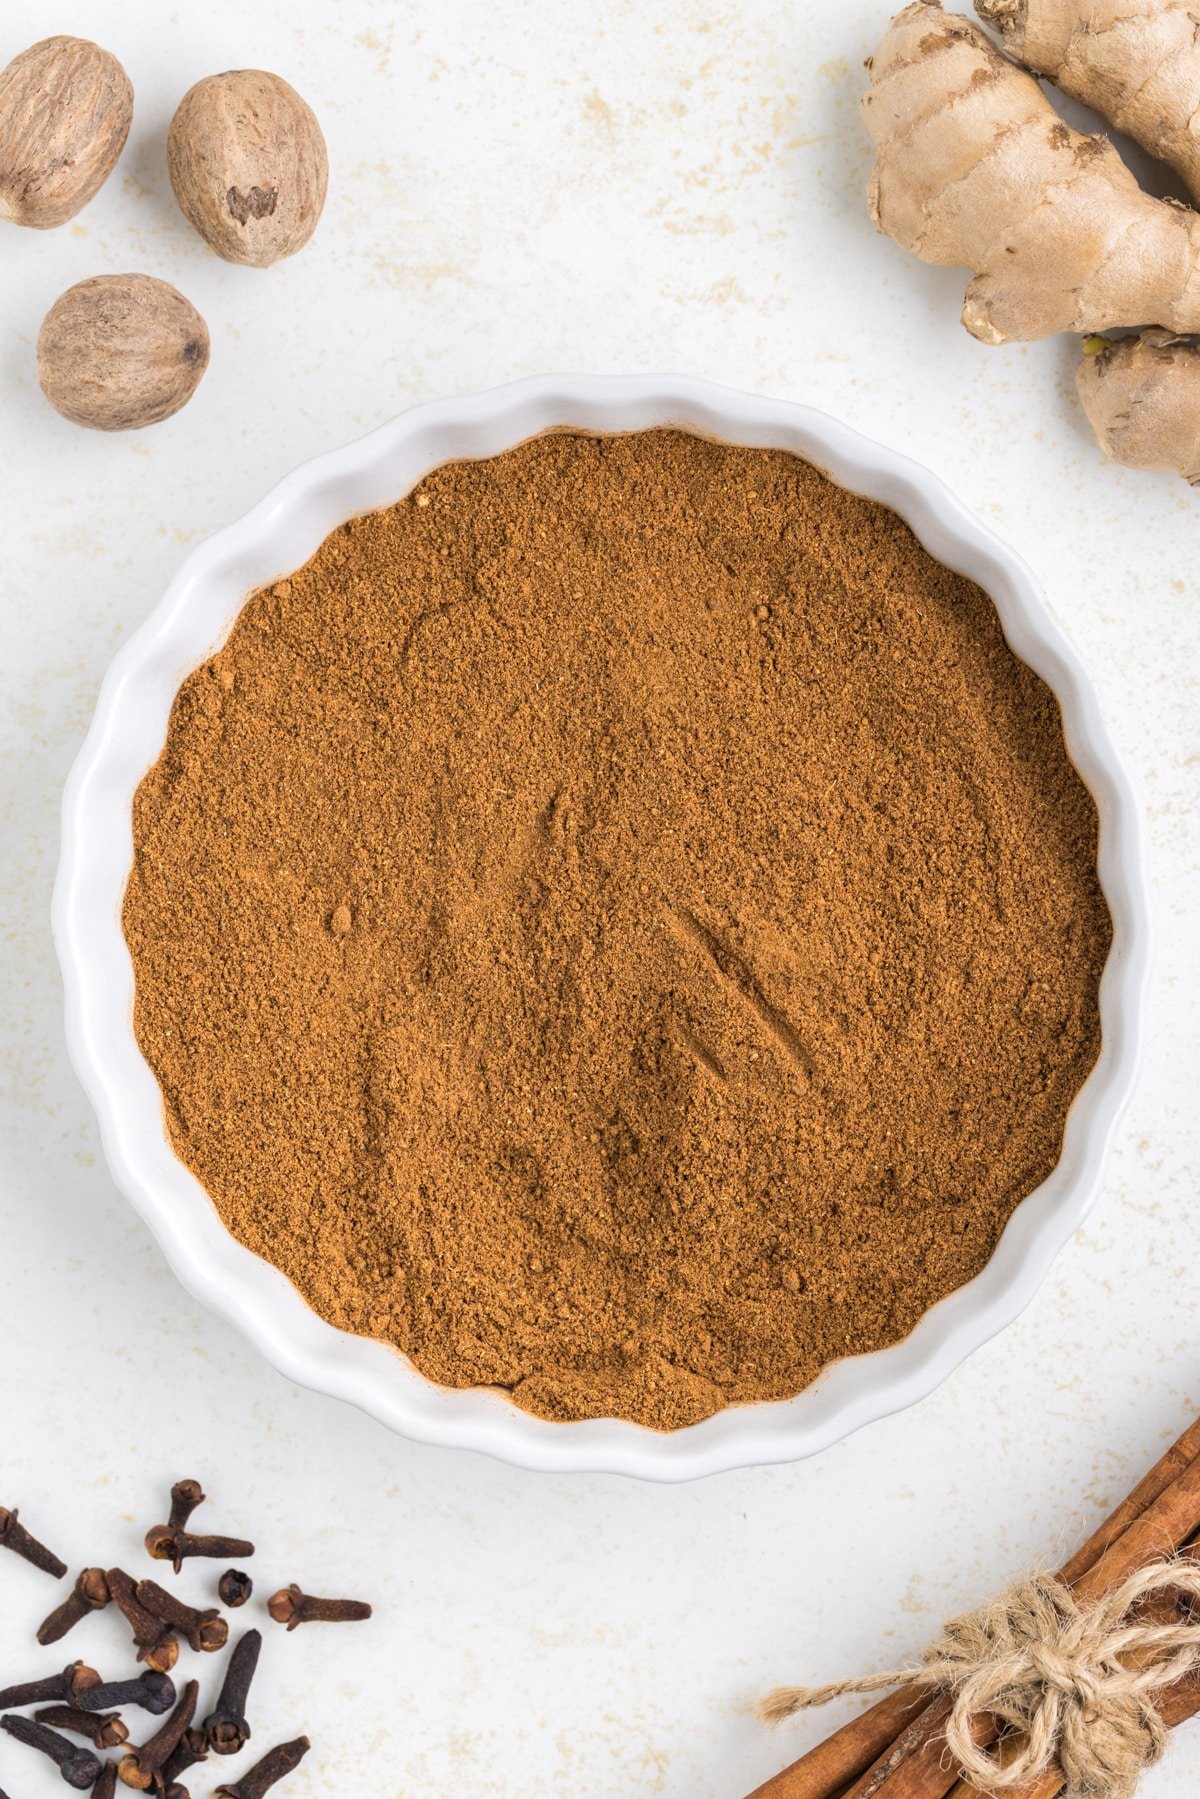 A dish filled with a homemade spice blend, surrounded by ginger root, nutmeg, cloves, and cinnamon.